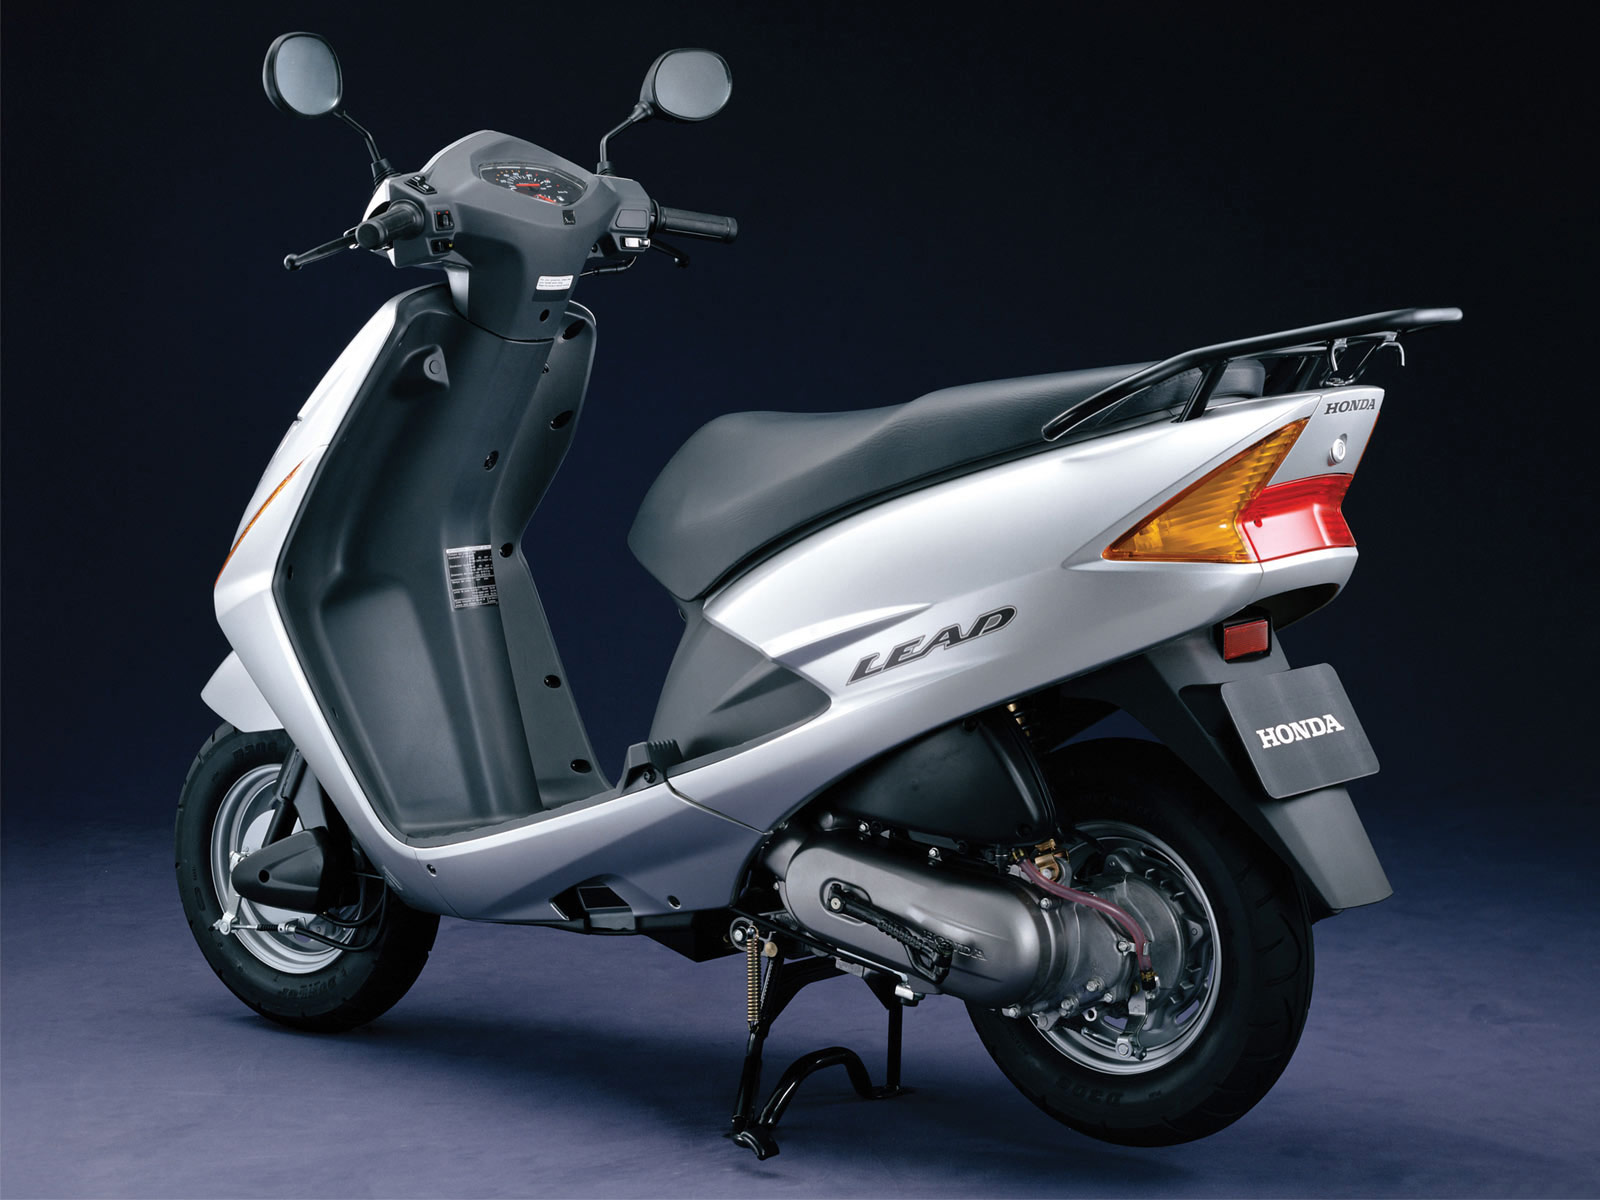 2003 HONDA  Lead scooter  pictures accident lawyers info